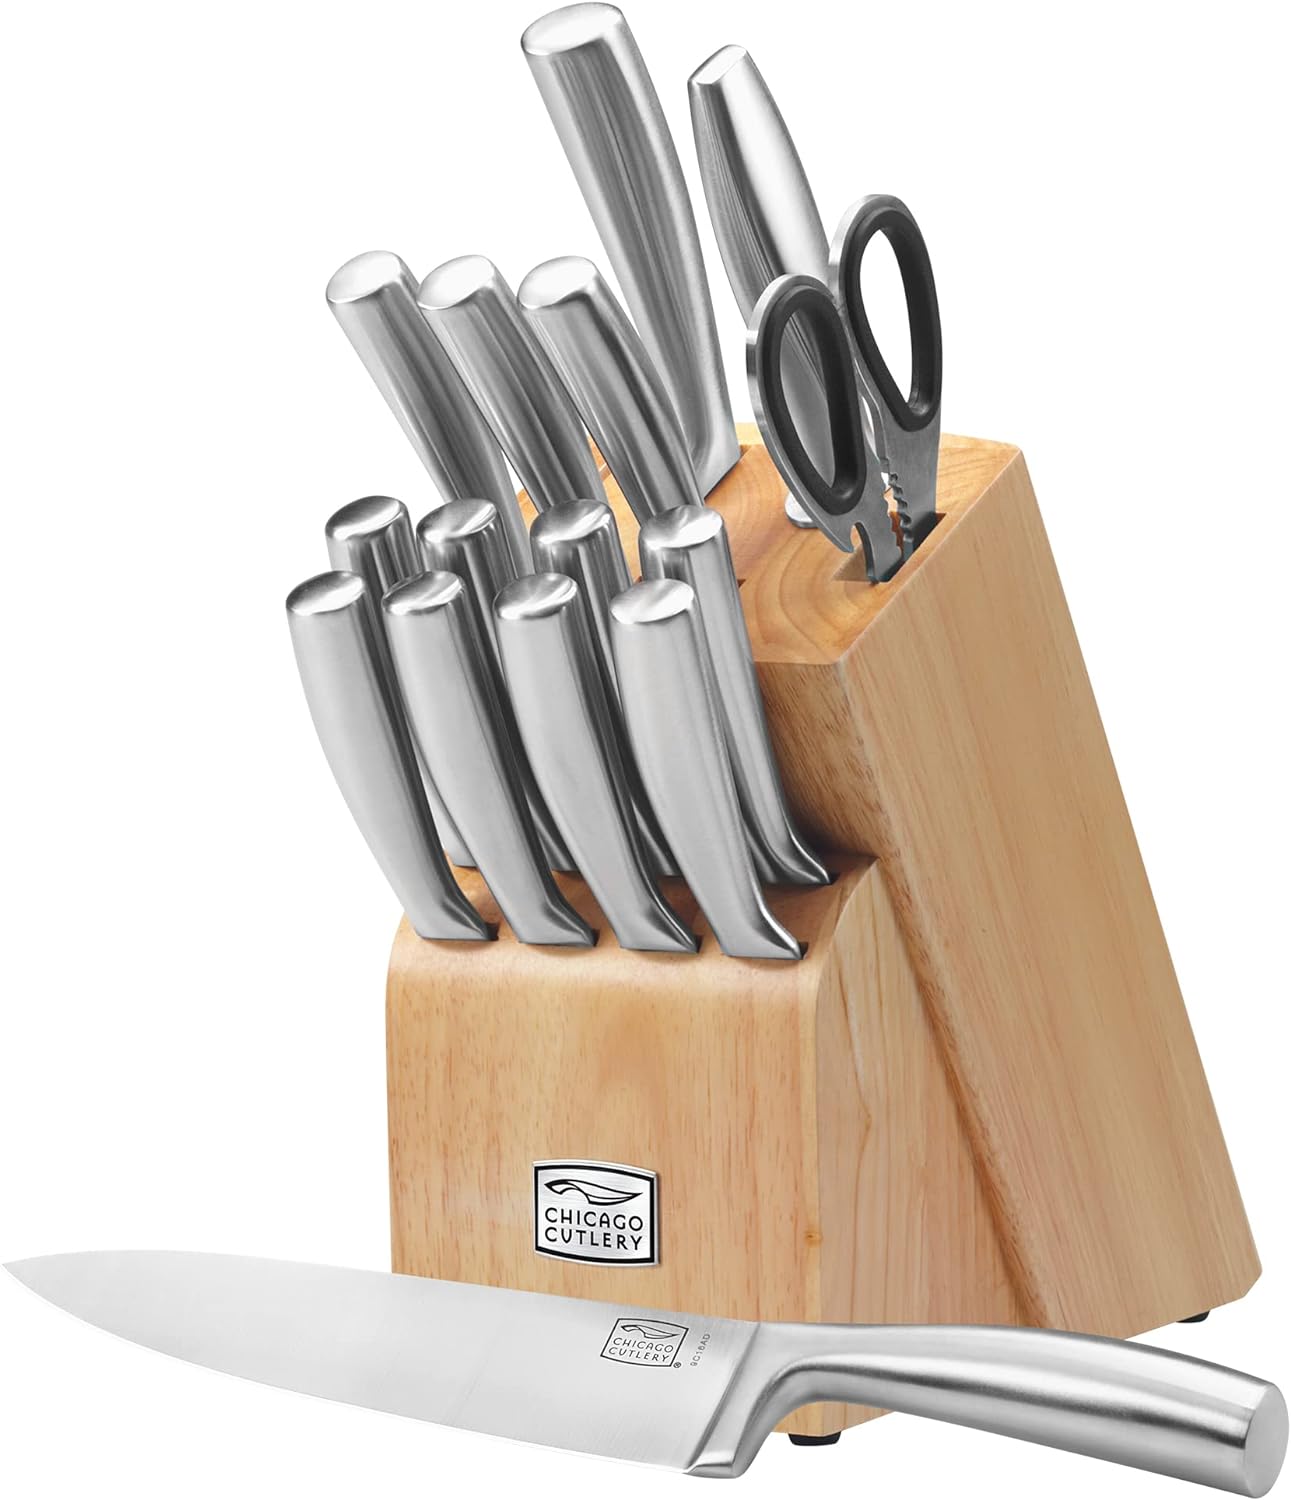 Chicago Cutlery Elston 16pc Block Set Review